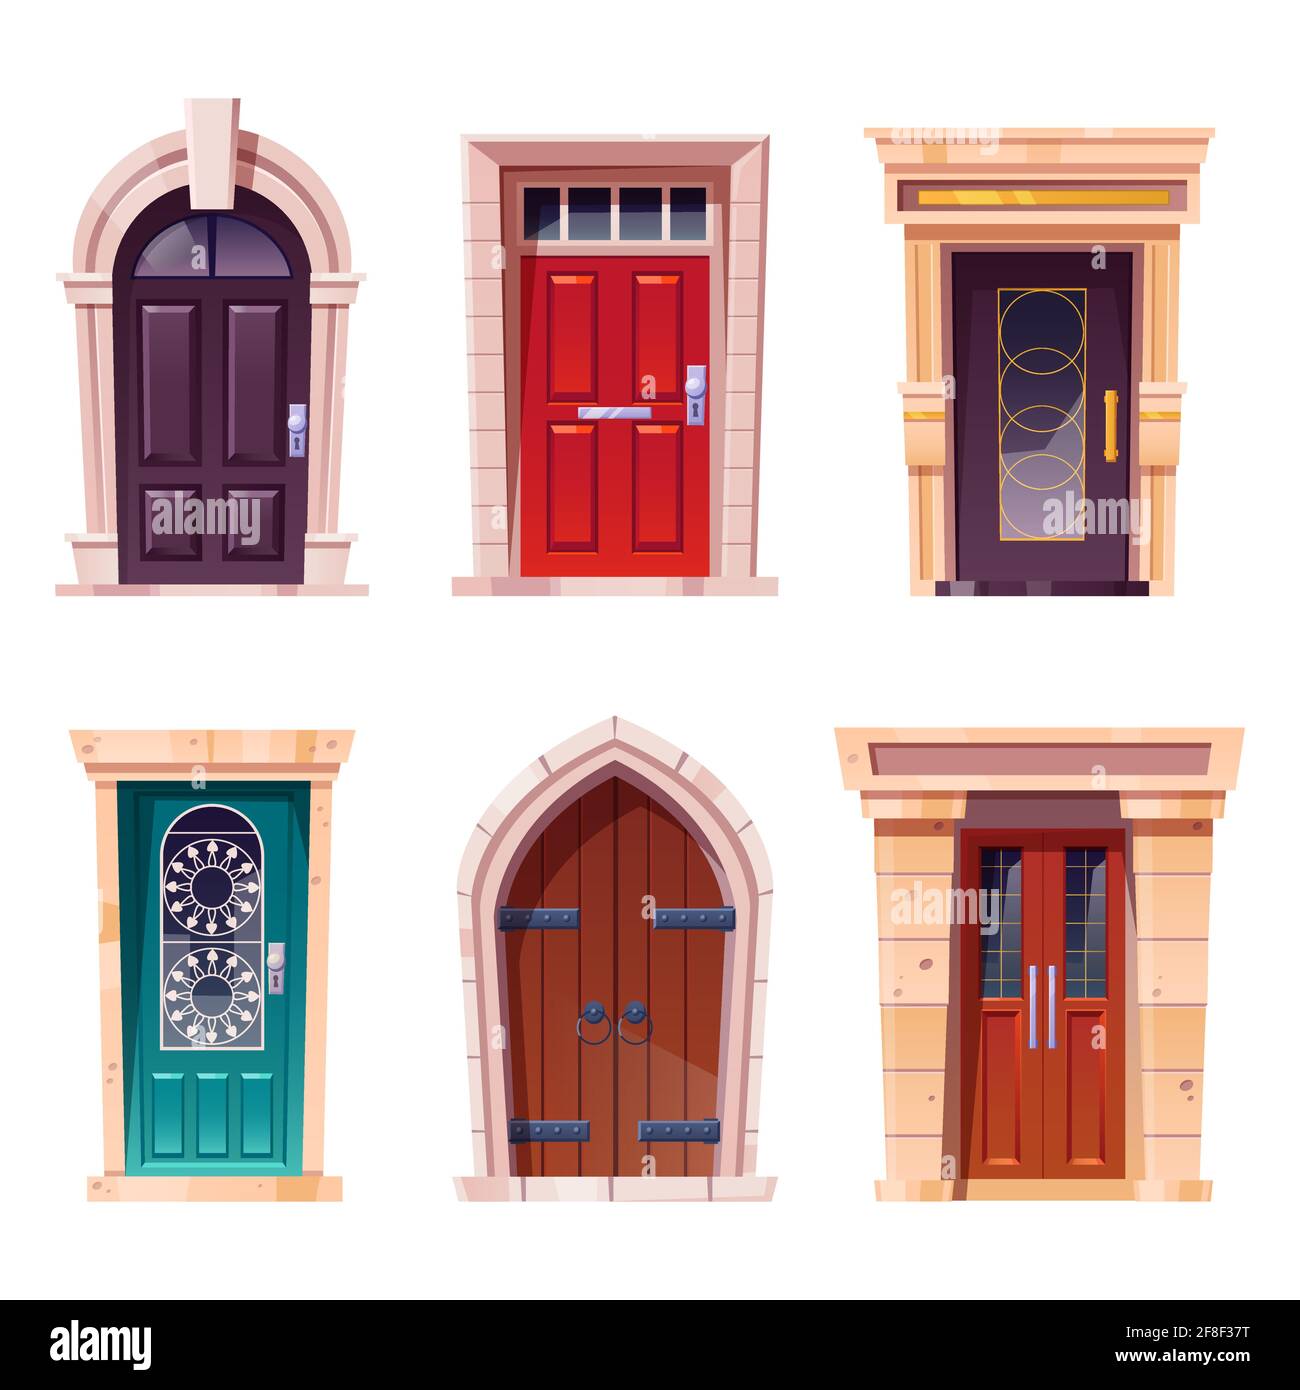 Wooden doors, medieval and modern style entries with stone doorjambs, metal handles and slot for mail. Architecture objects, cottage or castle exterior design elements, Cartoon vector illustration set Stock Vector